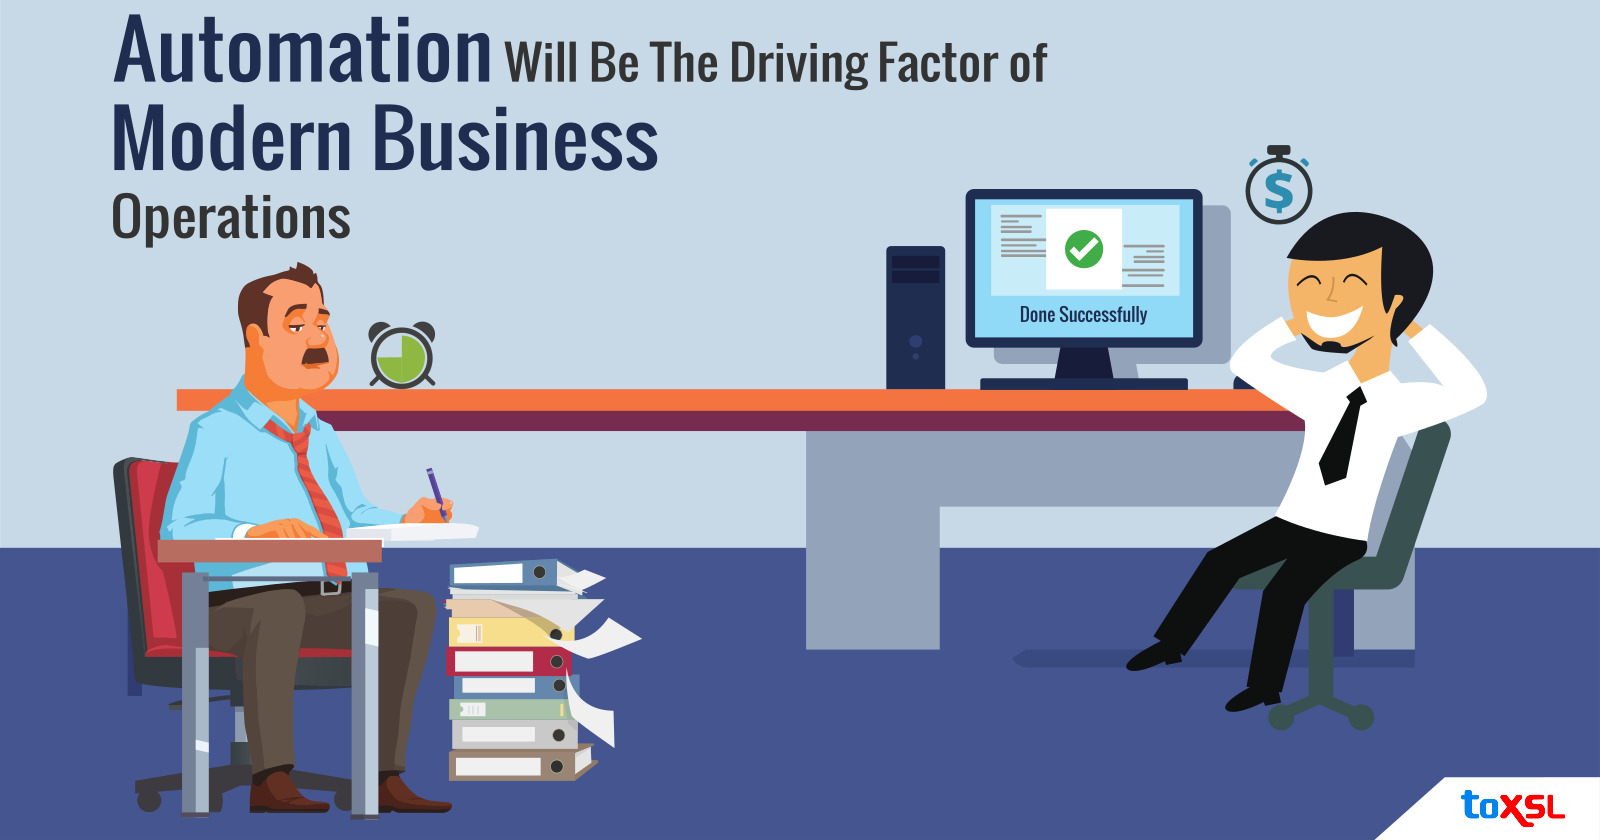 Automation Will Impact Modern Business Strategies and Operations